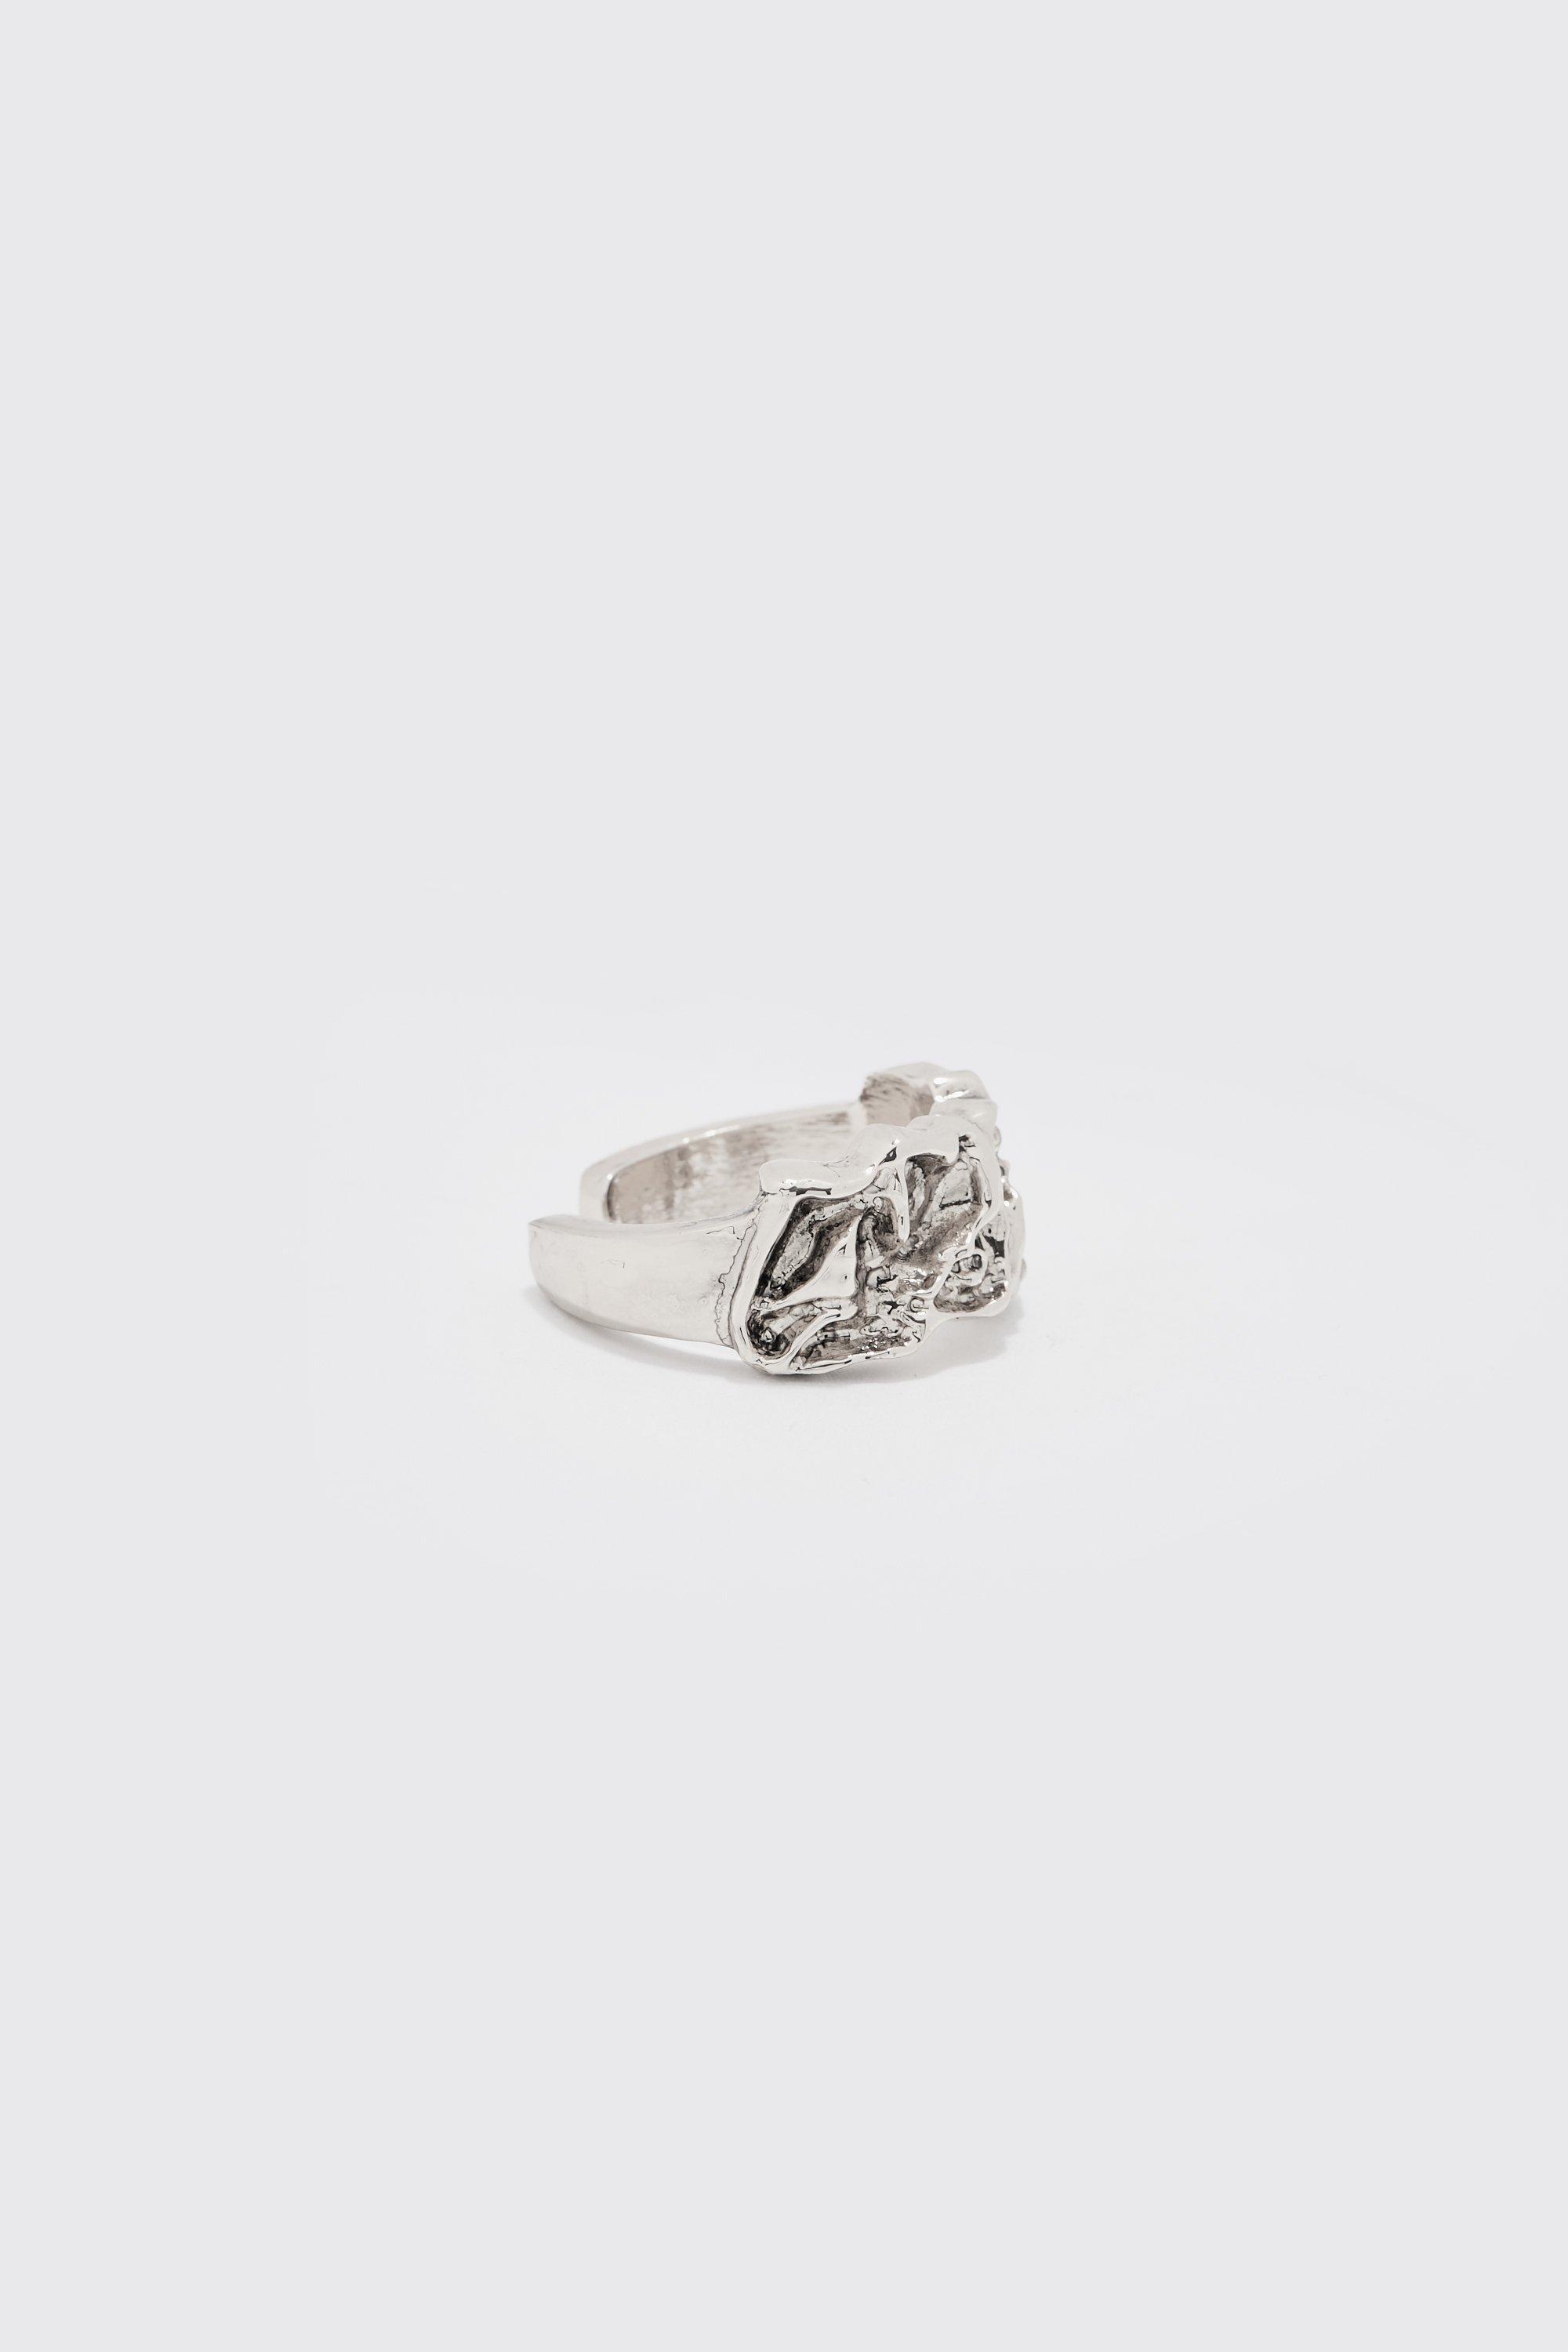 Image of Metal Melted Statement Ring In Silver, Grigio